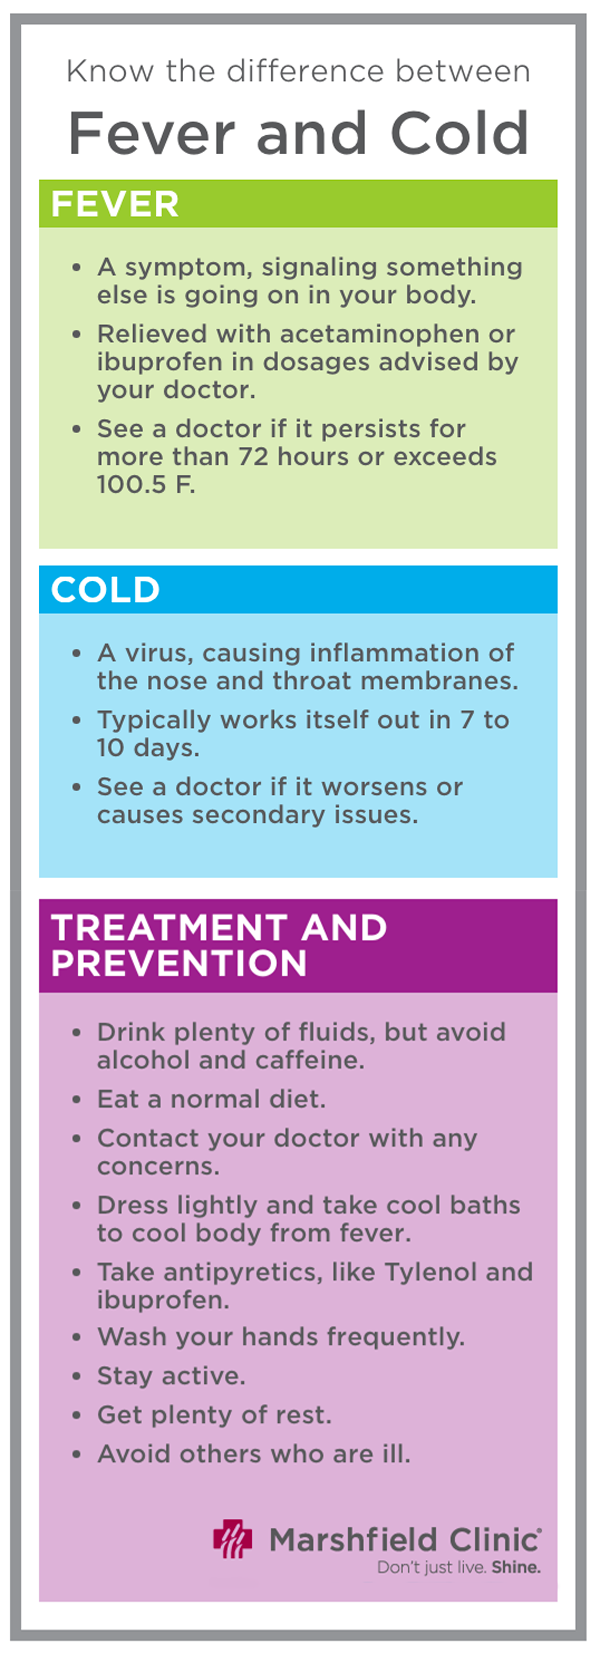 Know the difference between a fever and a cold with this chart